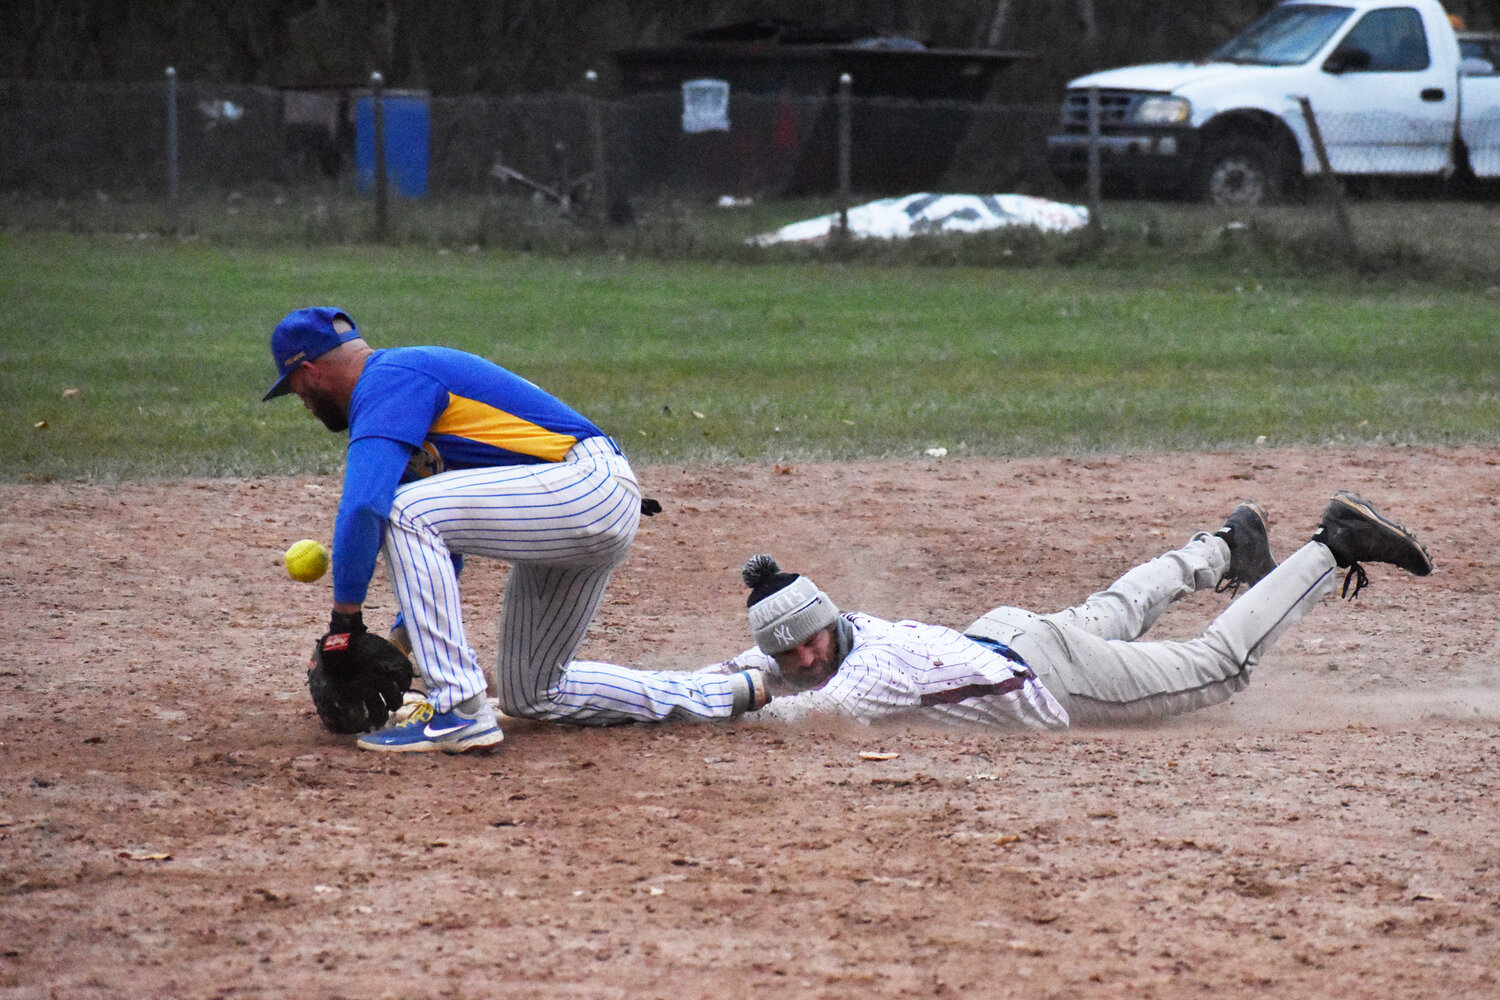 Mike Mills slides safely into second during a semifinal game before the Championship.